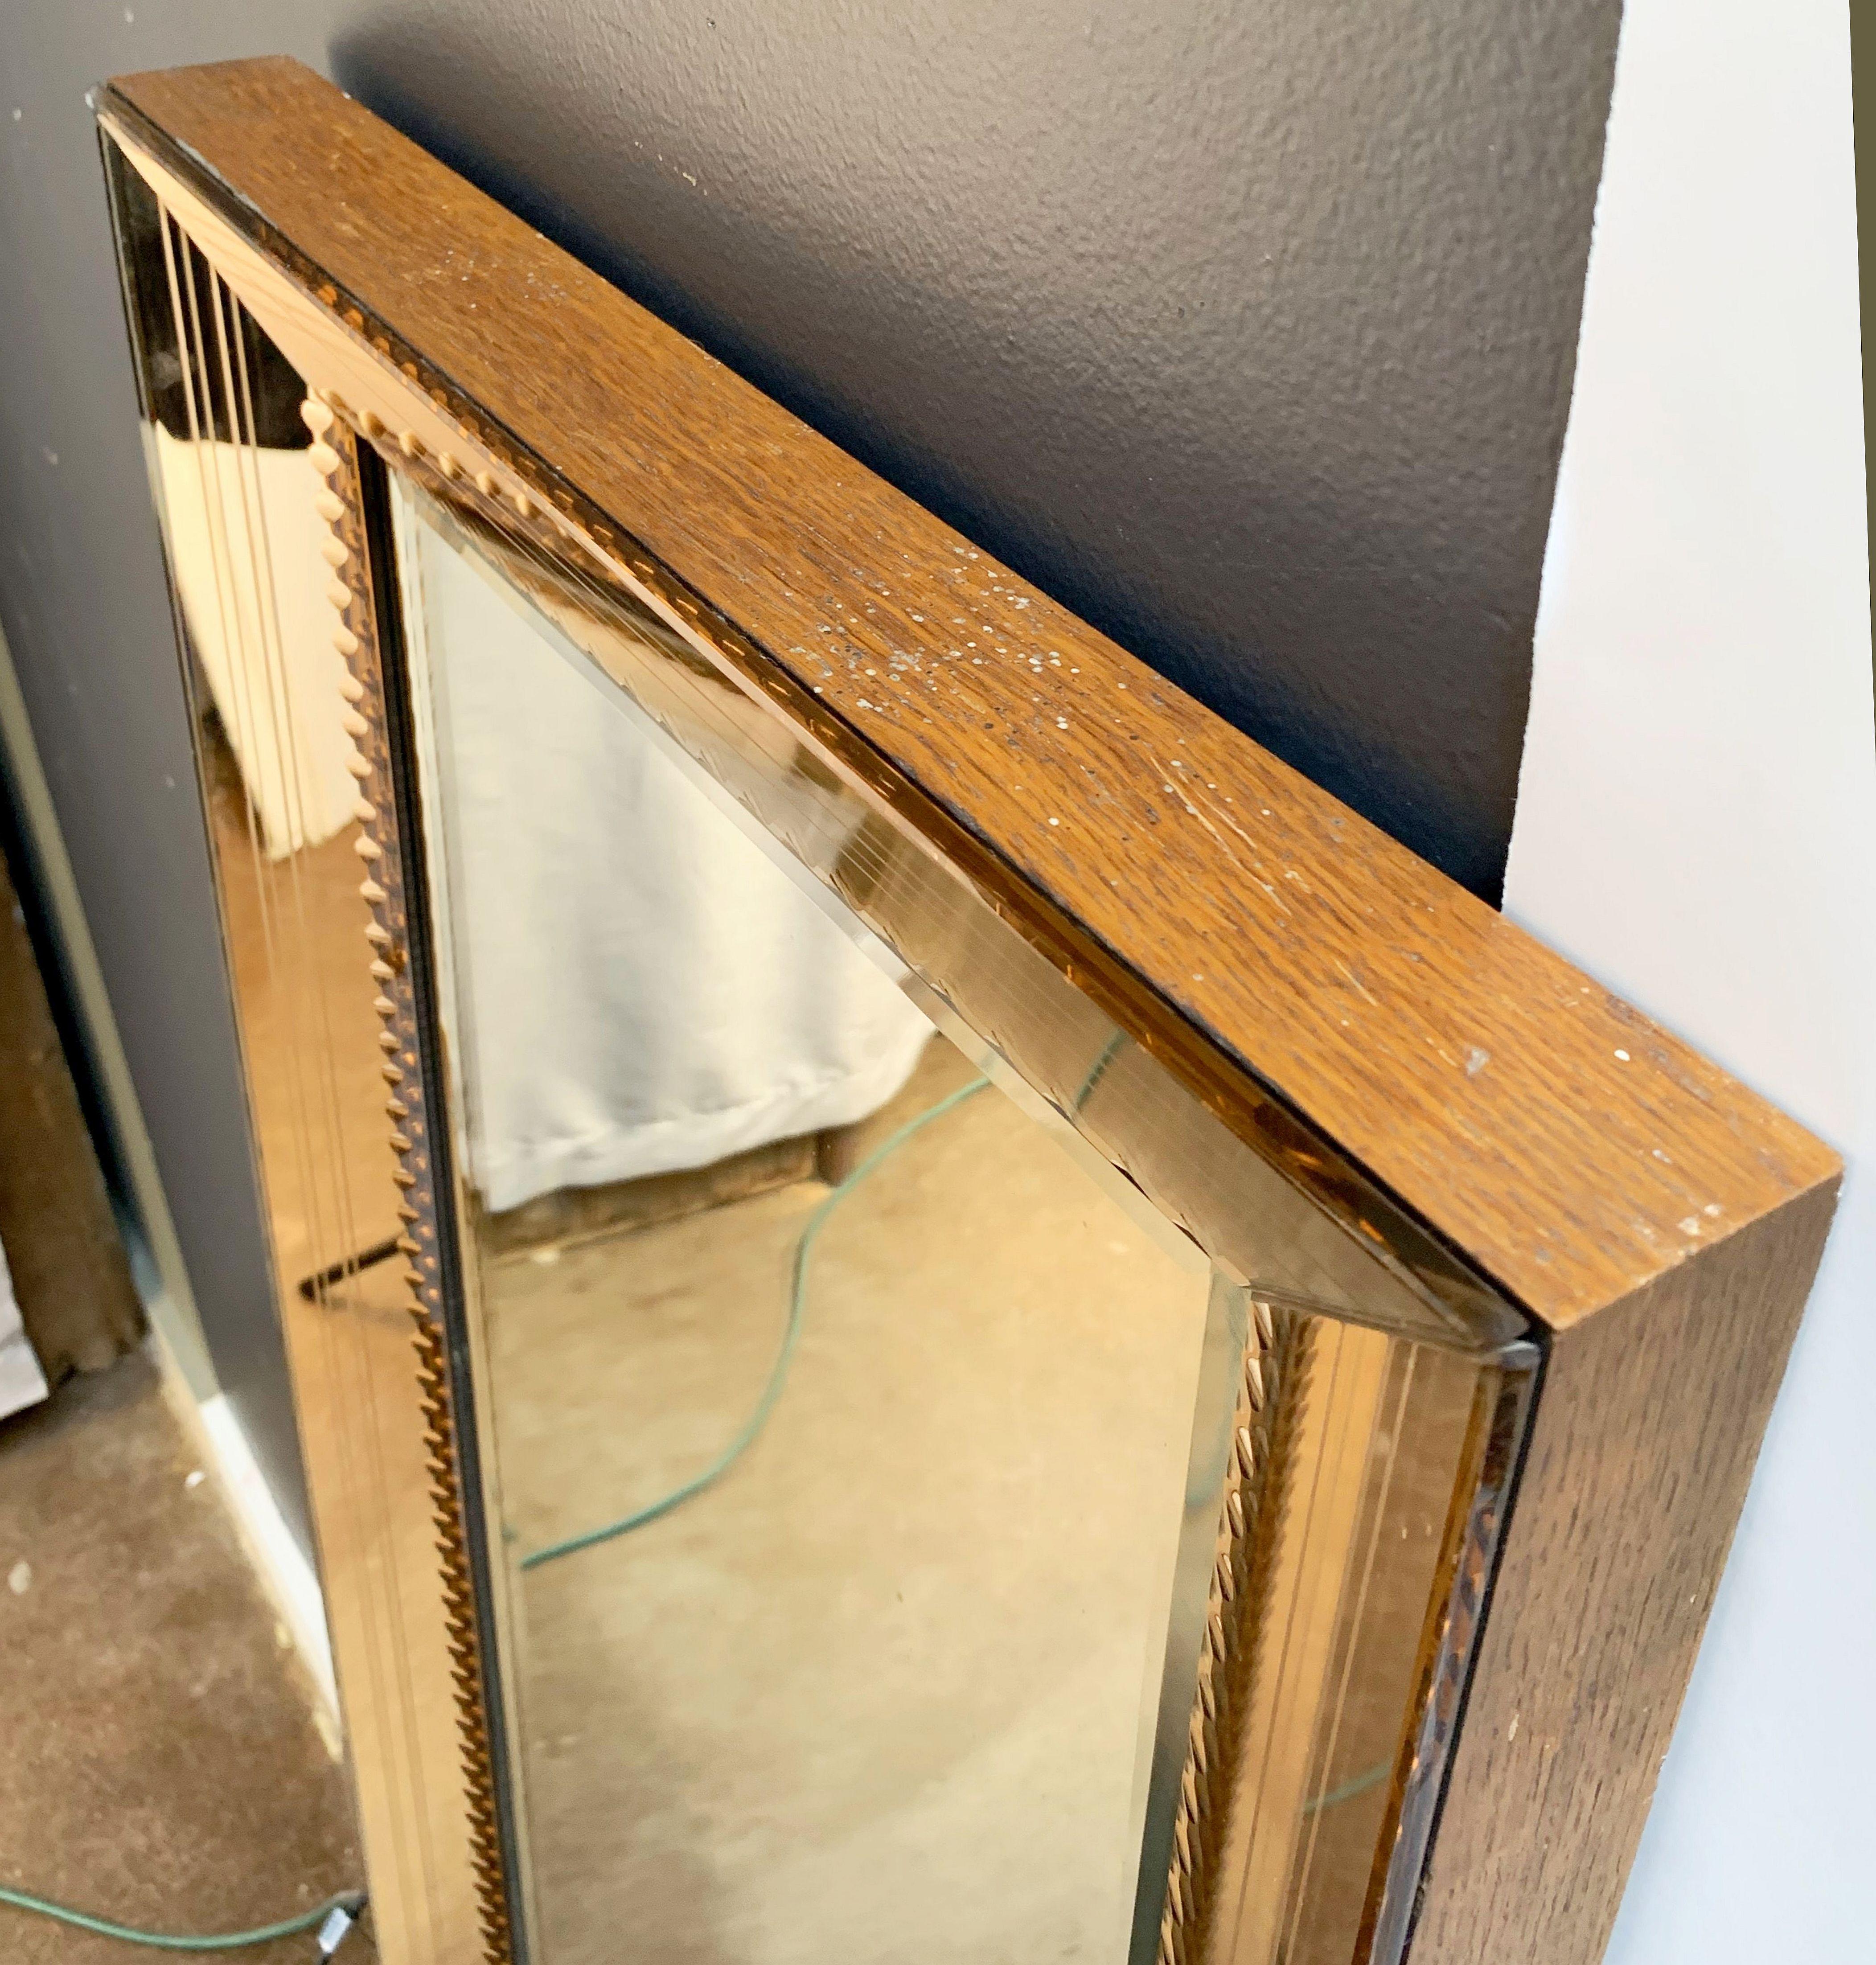 Art Deco Mirror with Beveled Frame of Copper-Colored Glass (H 58 3/4 x W 19 3/4) 10